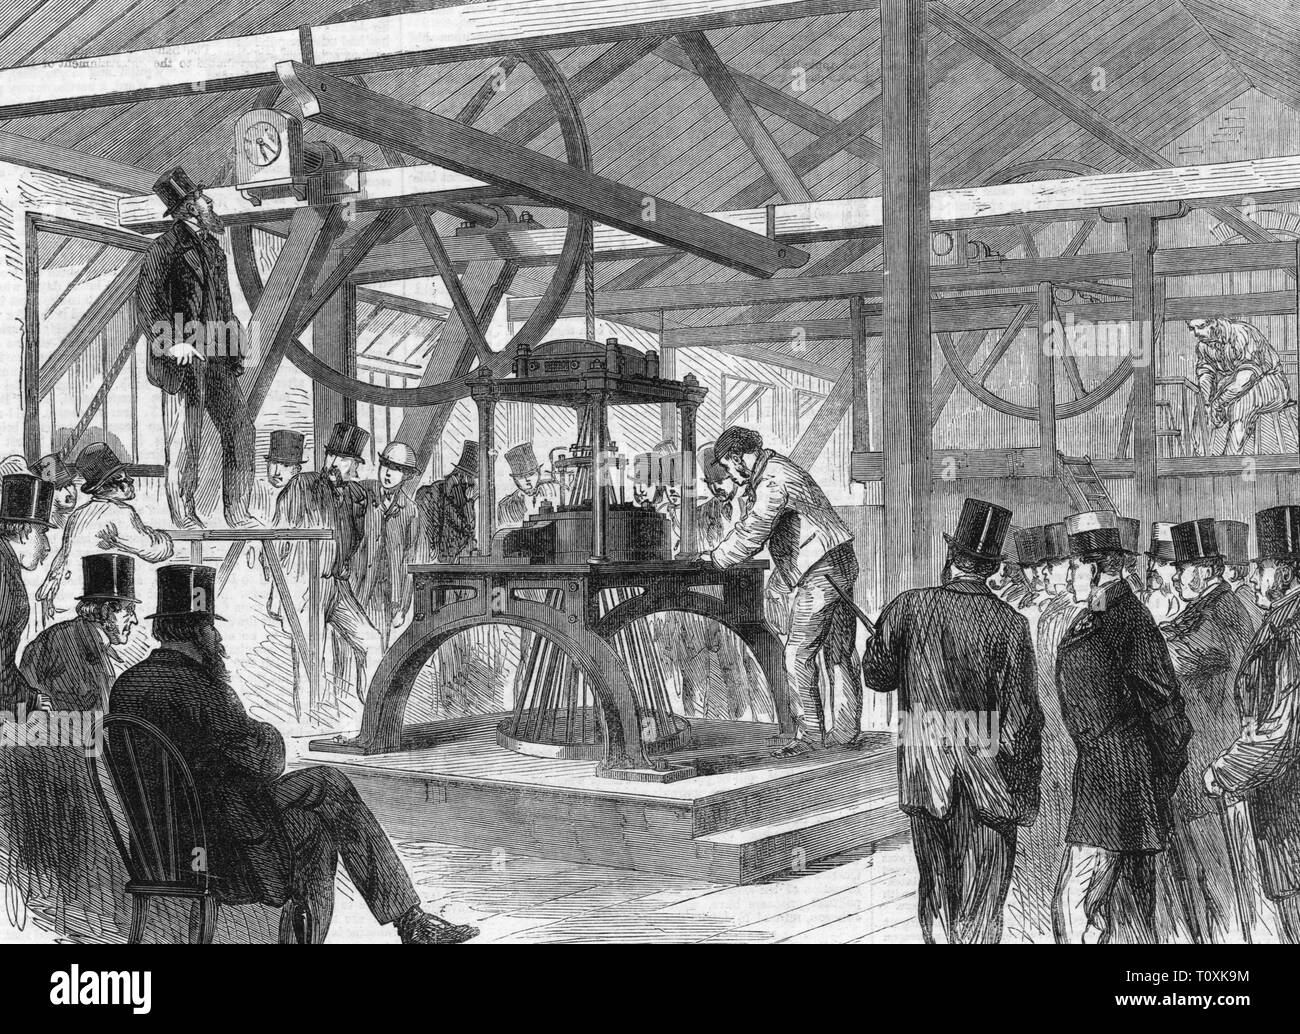 mail, telegraphy, Atlantic cable, laying 1865 - 1866, completion of the cable, Morden Wharf, East Greenvich, wood engraving, 'The London Illustrated News', 1865, Anglo-American Telegraph Company, industry, industries, production, manufacturing, technics, technology, technologies, machine, machines, transatlantic communications cable, undersea cable, undersea cables, telegraph cable, oversea connection, people, 19th century, mail, post, moving, transfer, transferral, shifting, final completion, completion date, cable, cables, historic, historical, Additional-Rights-Clearance-Info-Not-Available Stock Photo